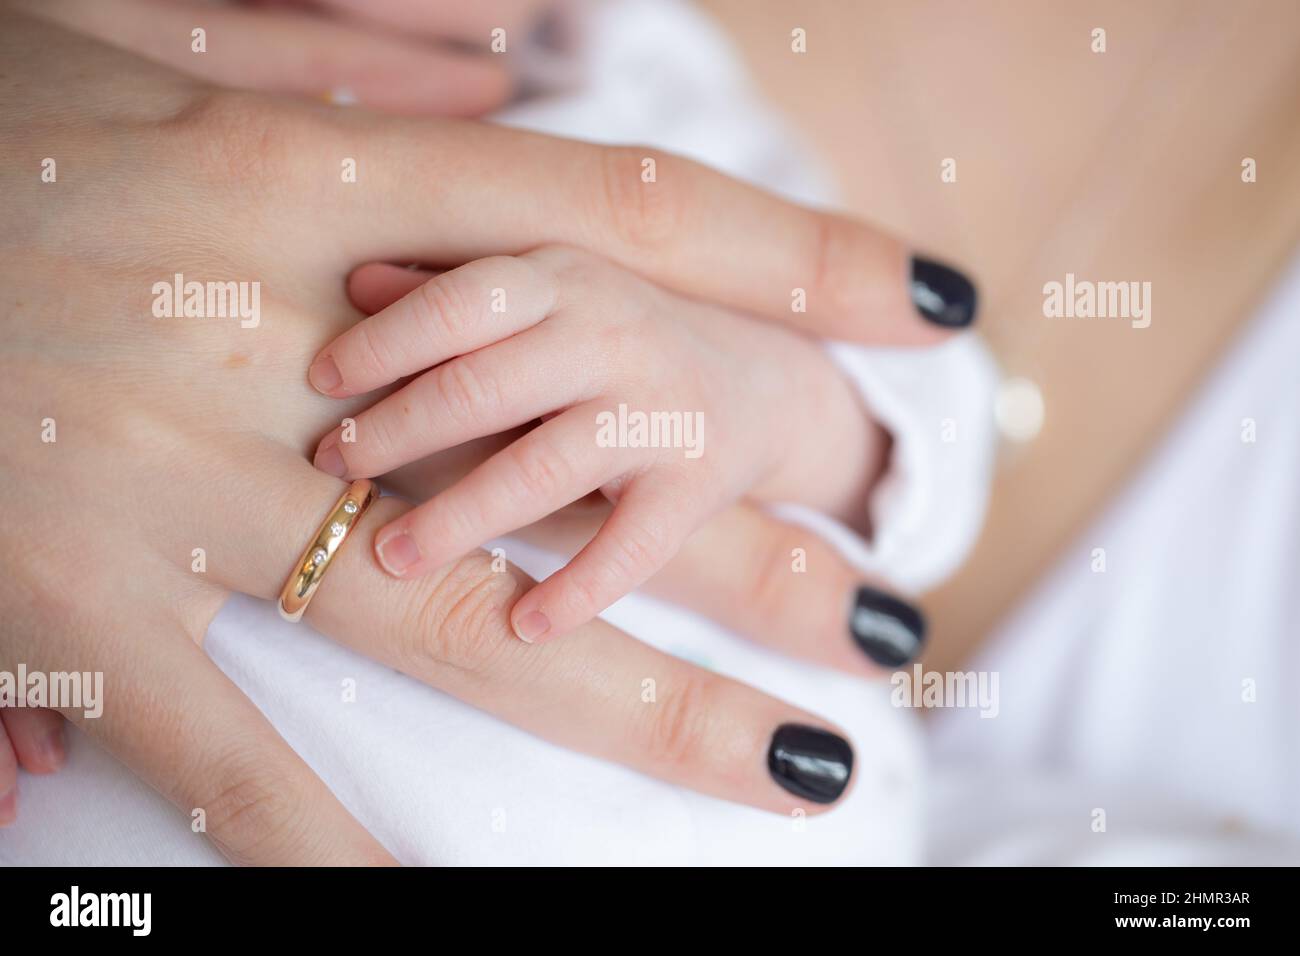 close up of a babies hand. Stock Photo